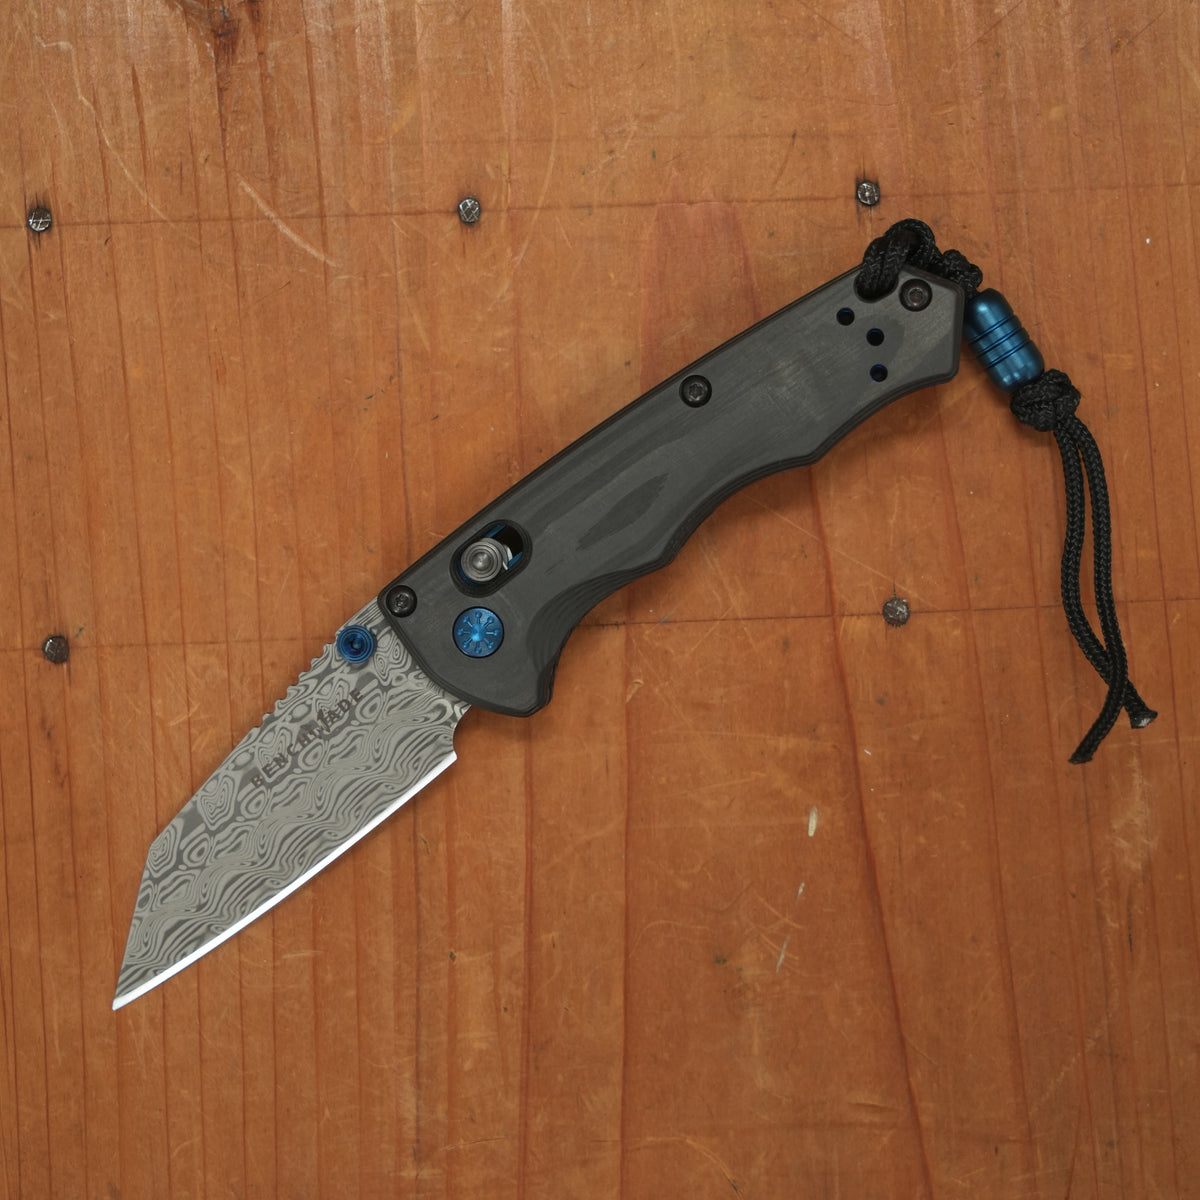 Benchmade Gold Class 290-241 Full Immunity Damasteel Wharncliffe AXIS Lock Unidirectional Carbon Fiber Handle